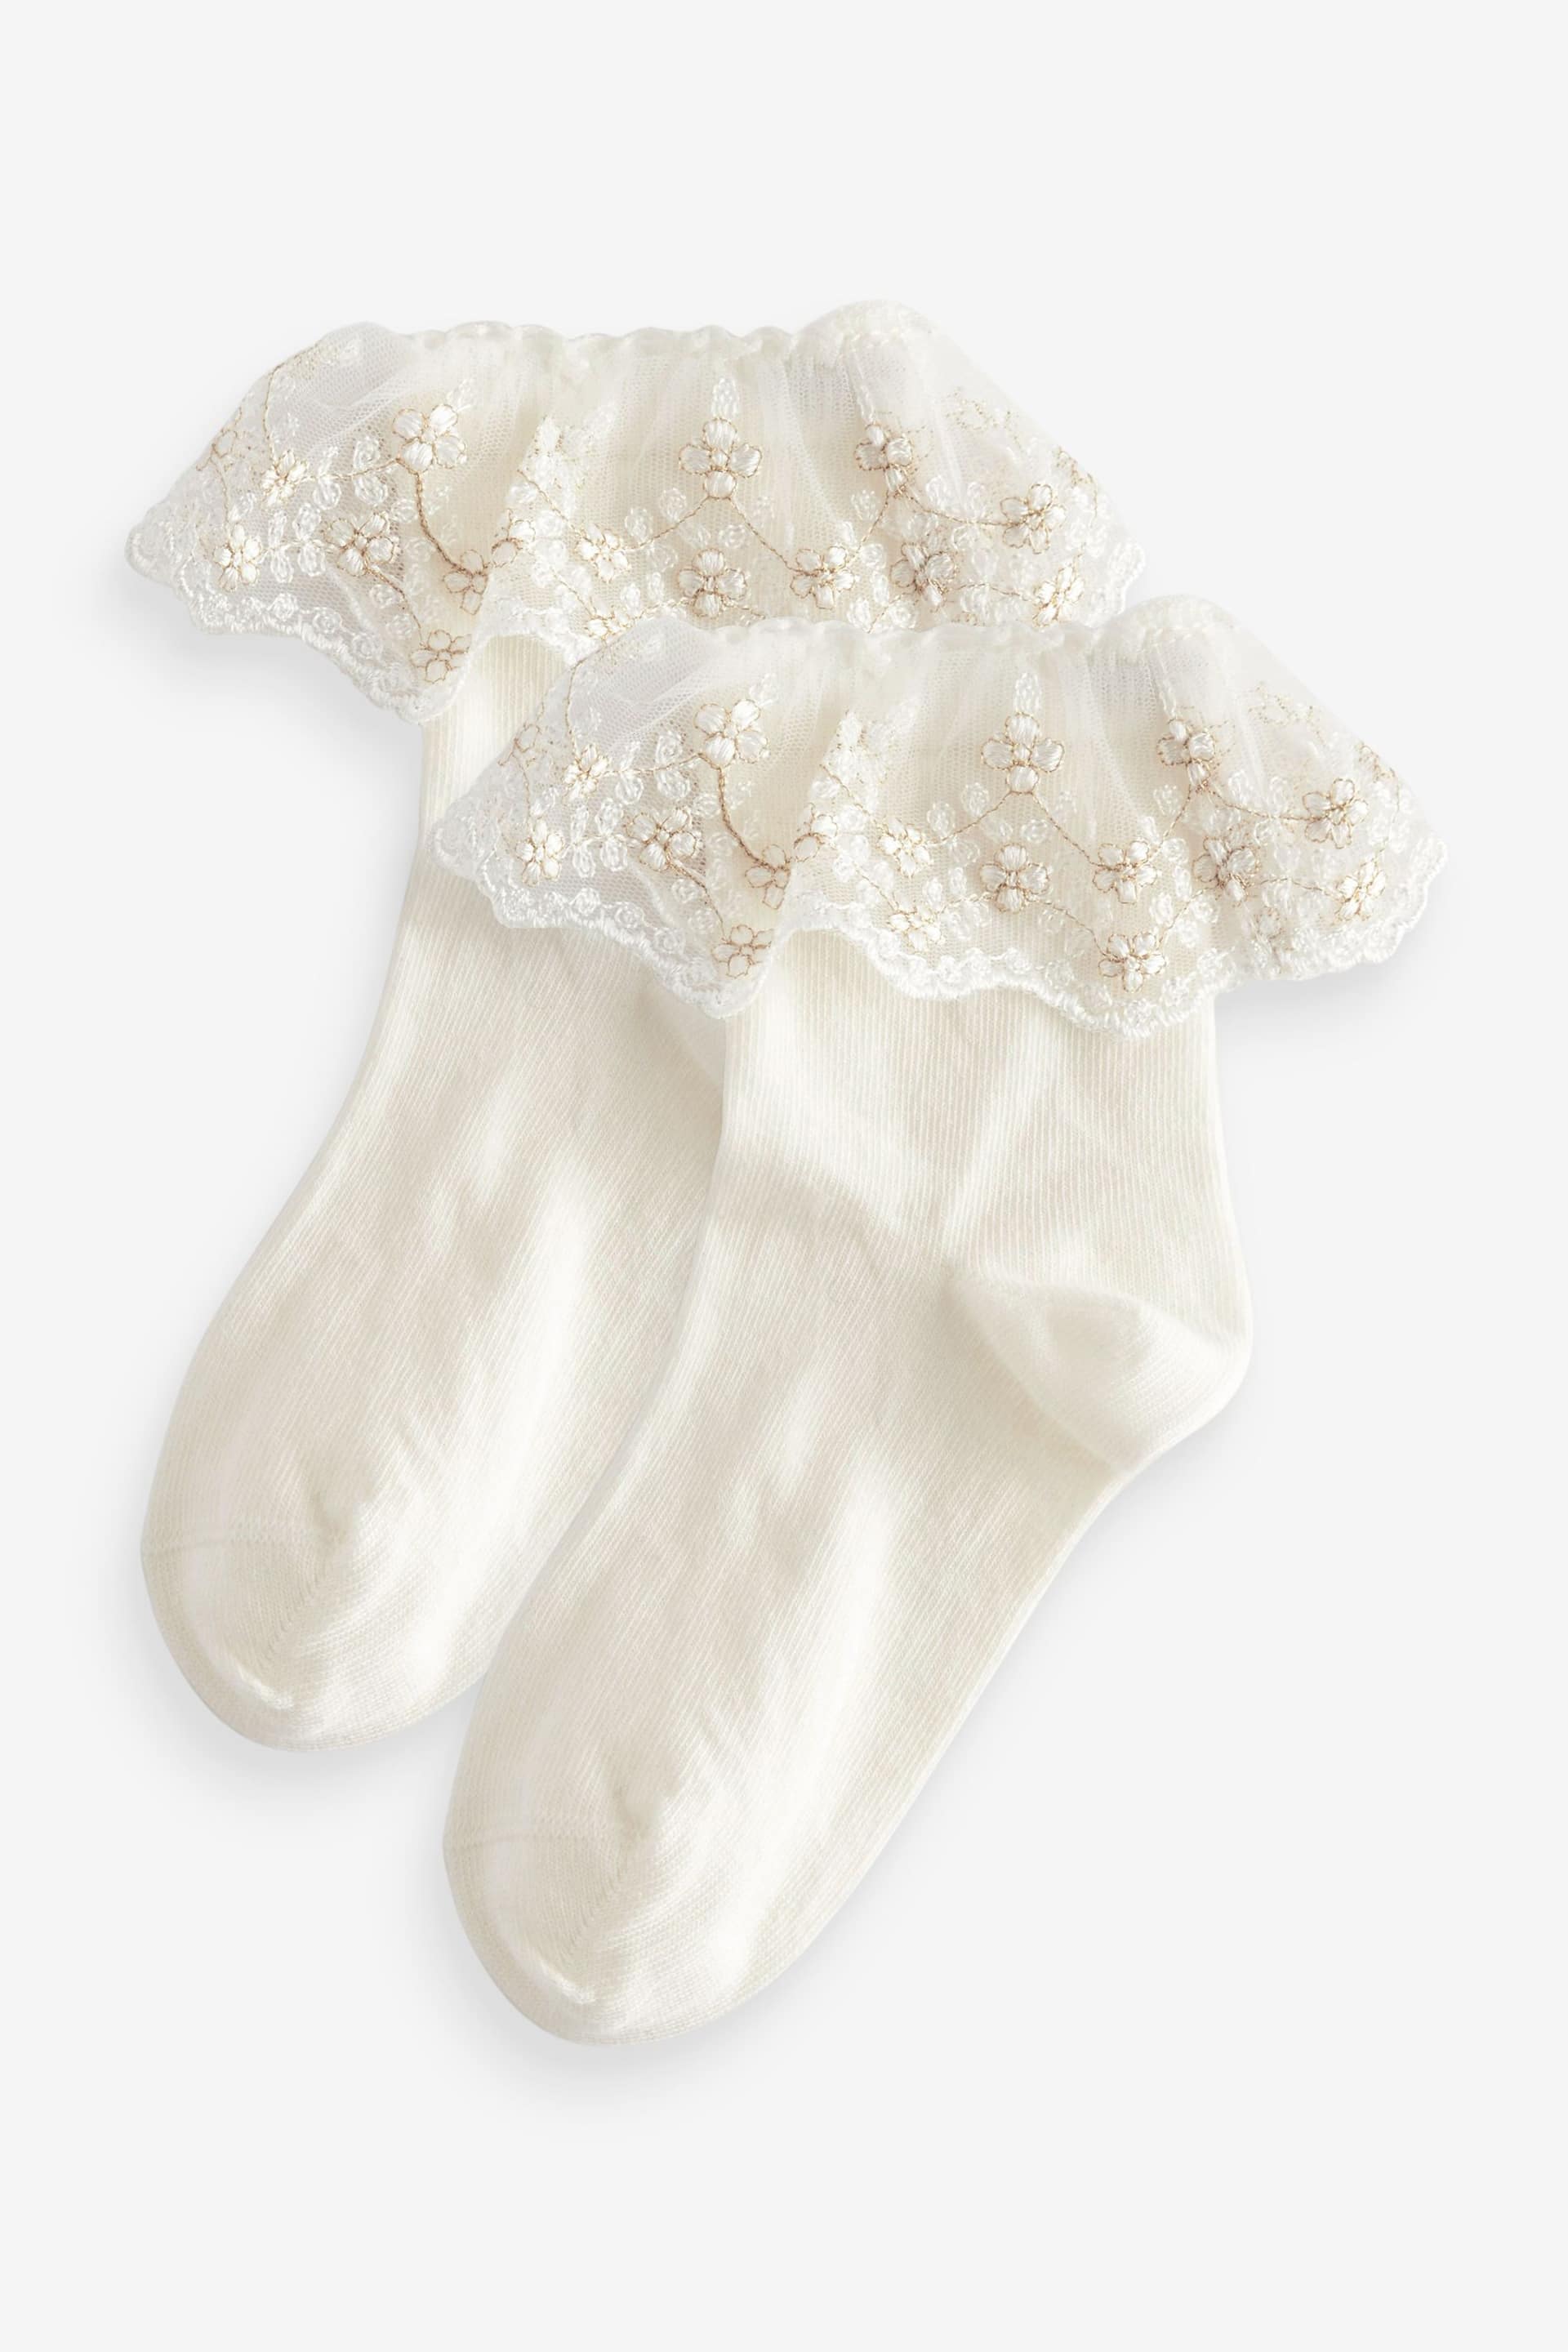 Cream Cotton Rich Bridesmaid Ruffle Ankle Socks 2 Pack - Image 1 of 2